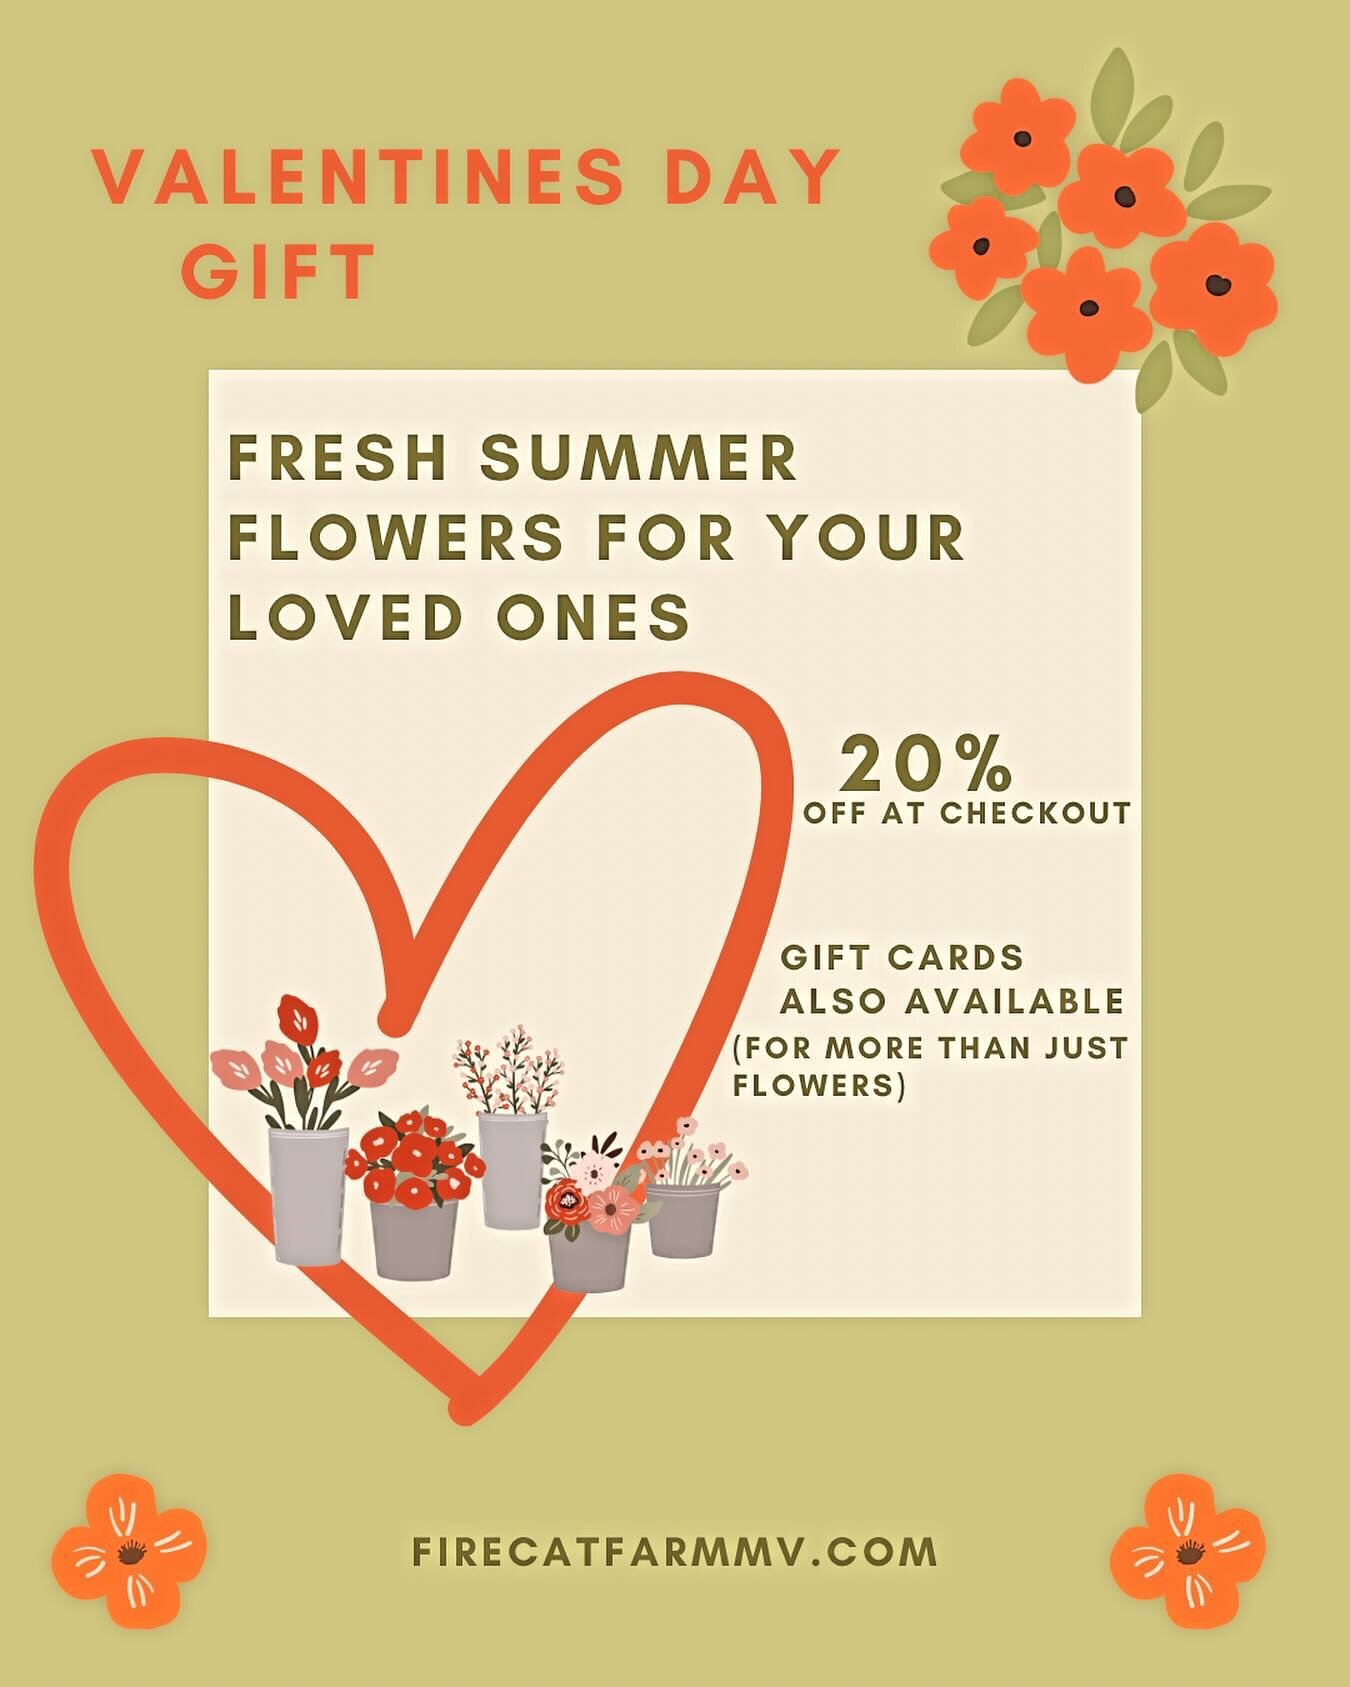 Send some love and flowers to someone you care about this Valentine&rsquo;s Day. It&rsquo;s simple, buy as many bouquets as you want to give and let your loved one pick them up this summer! Still 20% off at checkout until February 18th! We also sell 